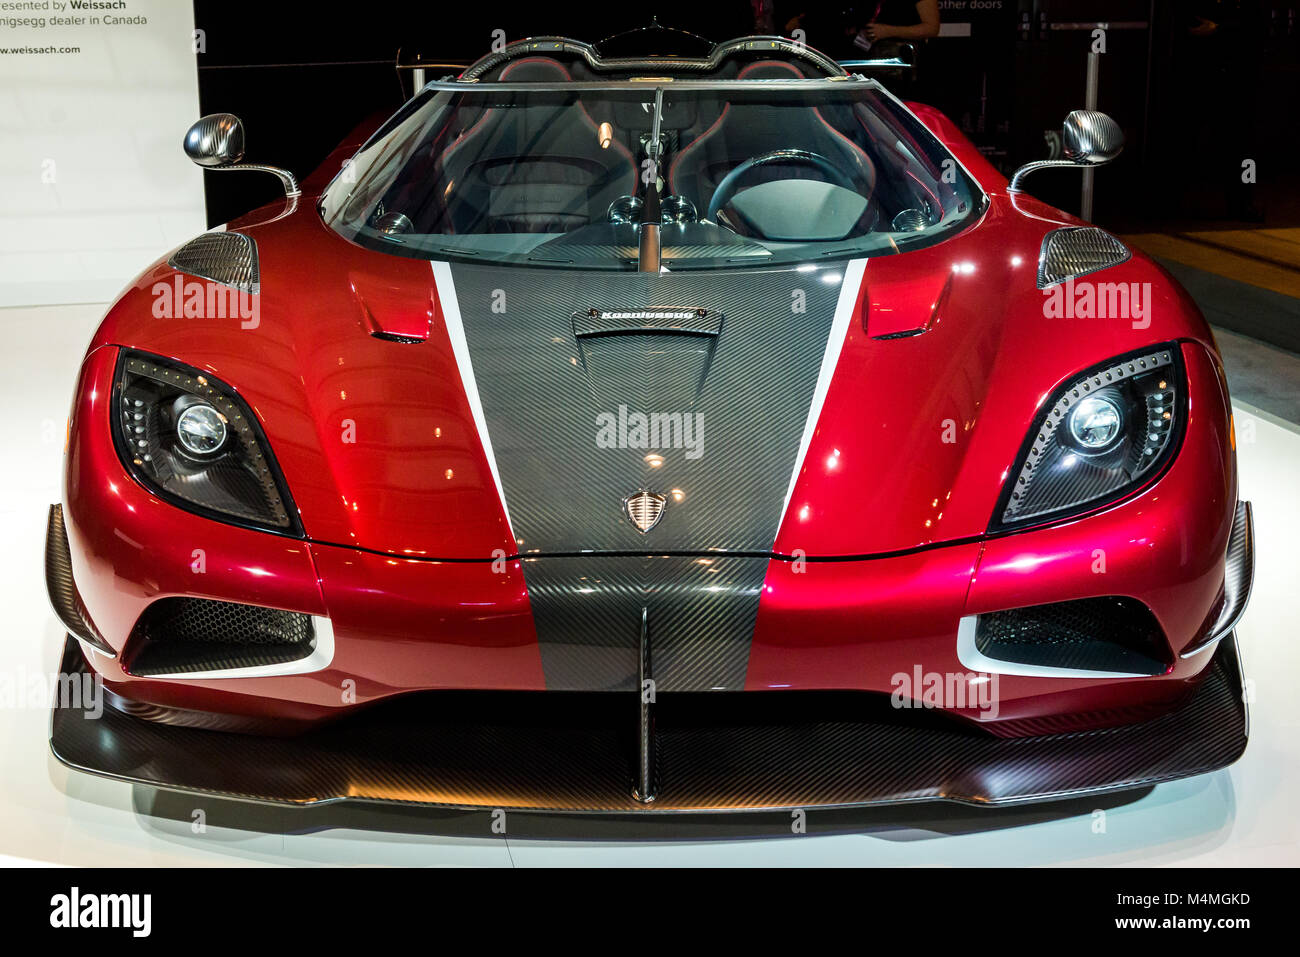 Toronto, Canada. 15th Feb, 2018. Presentation of Koenigsegg Agera RS sport car during Media Preview Day at the 2018 Canadian International AutoShow (Feb. 16-25) Metro Toronto Convention Center. Credit: Anatoliy Chekrasov/Pacific Press/Alamy Live News Stock Photo